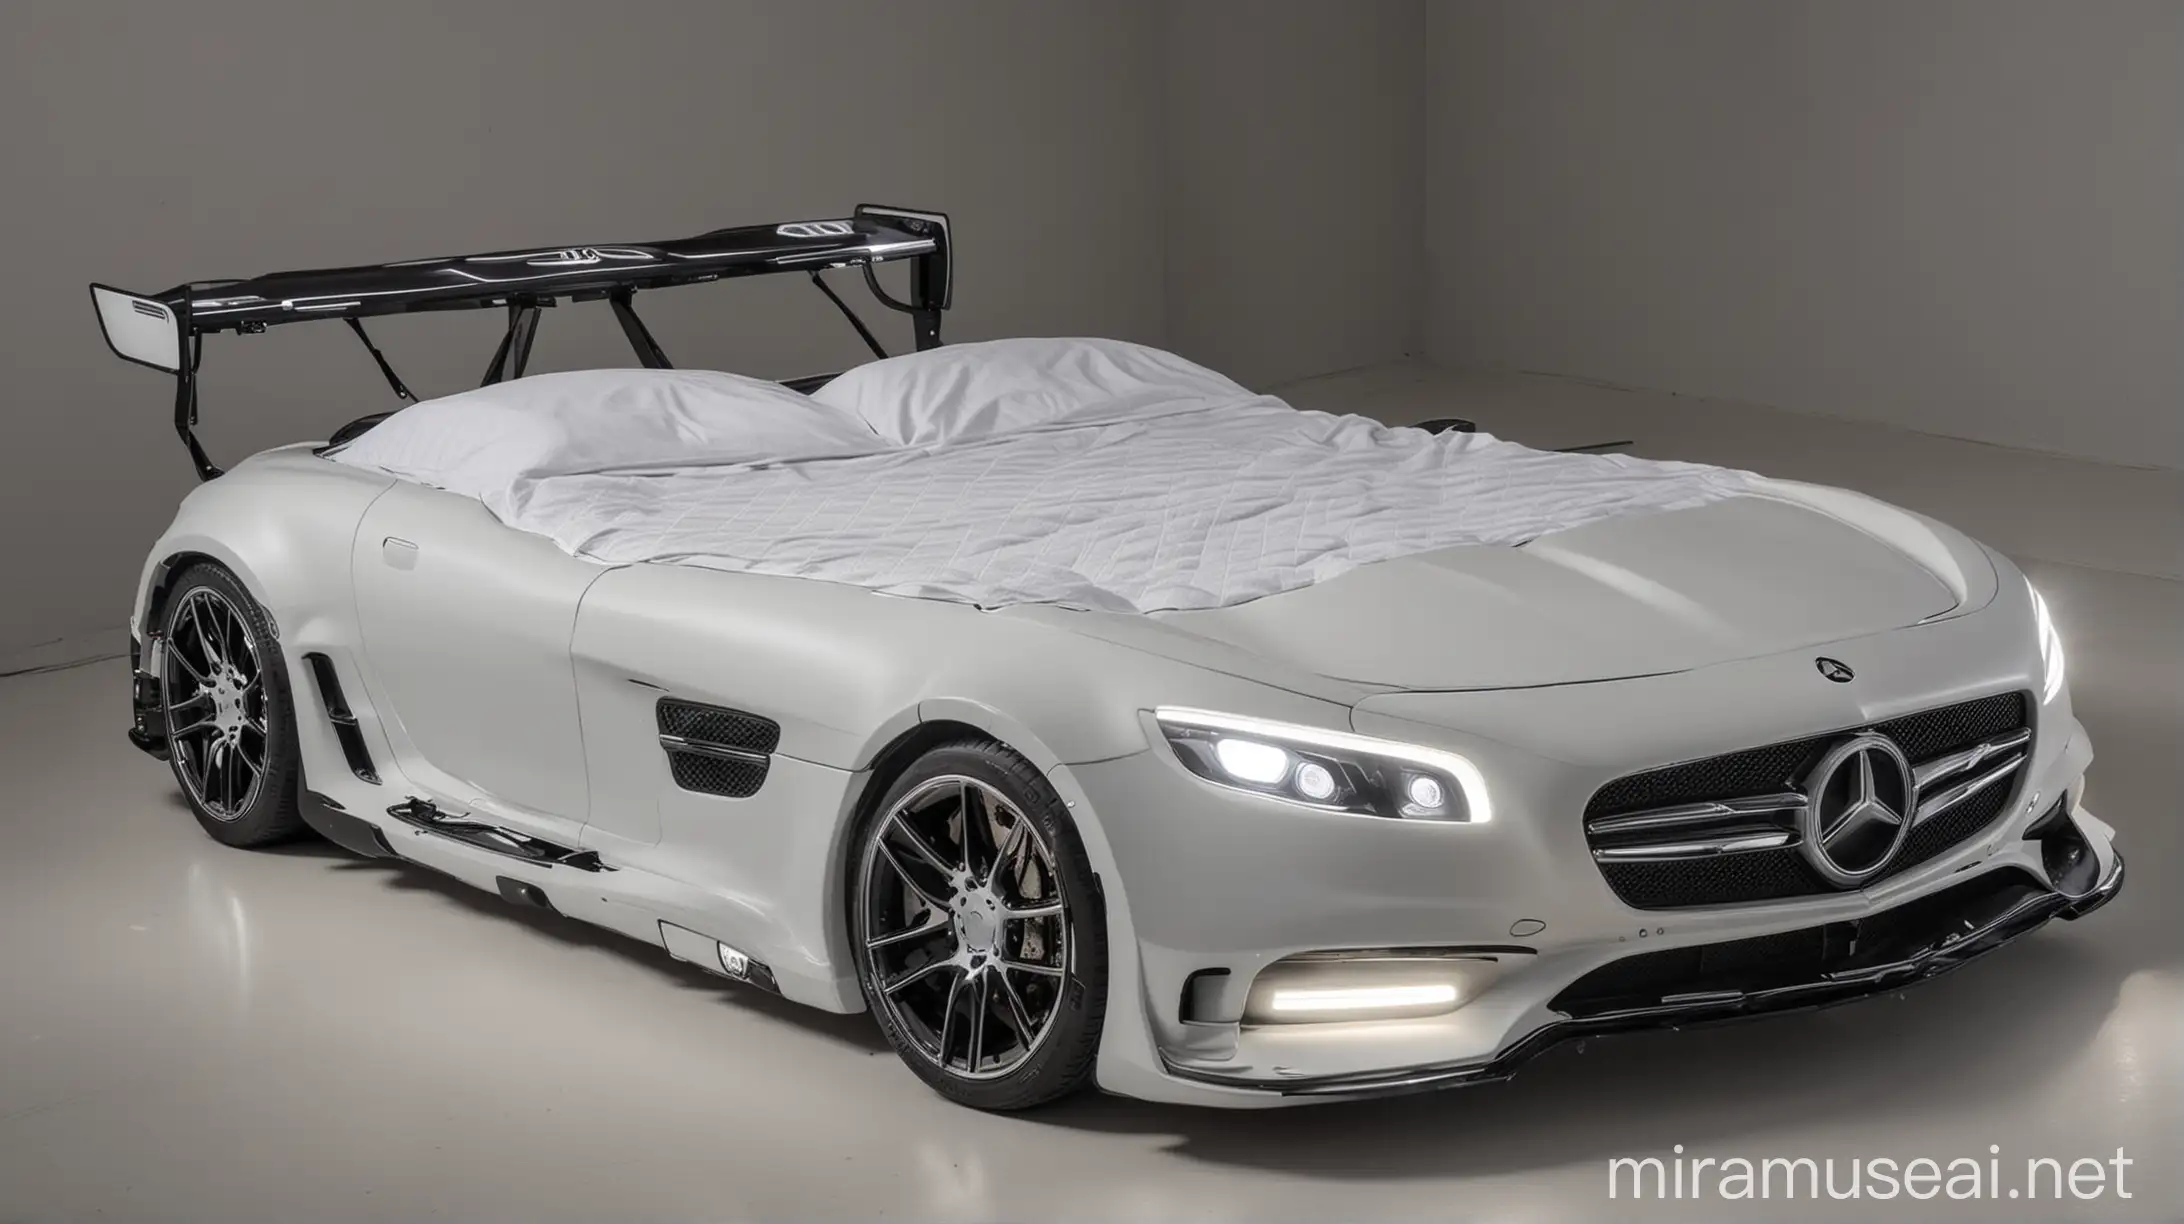 Luxurious Double Bed Shaped like MercedesAMG Car with Illuminated Headlights